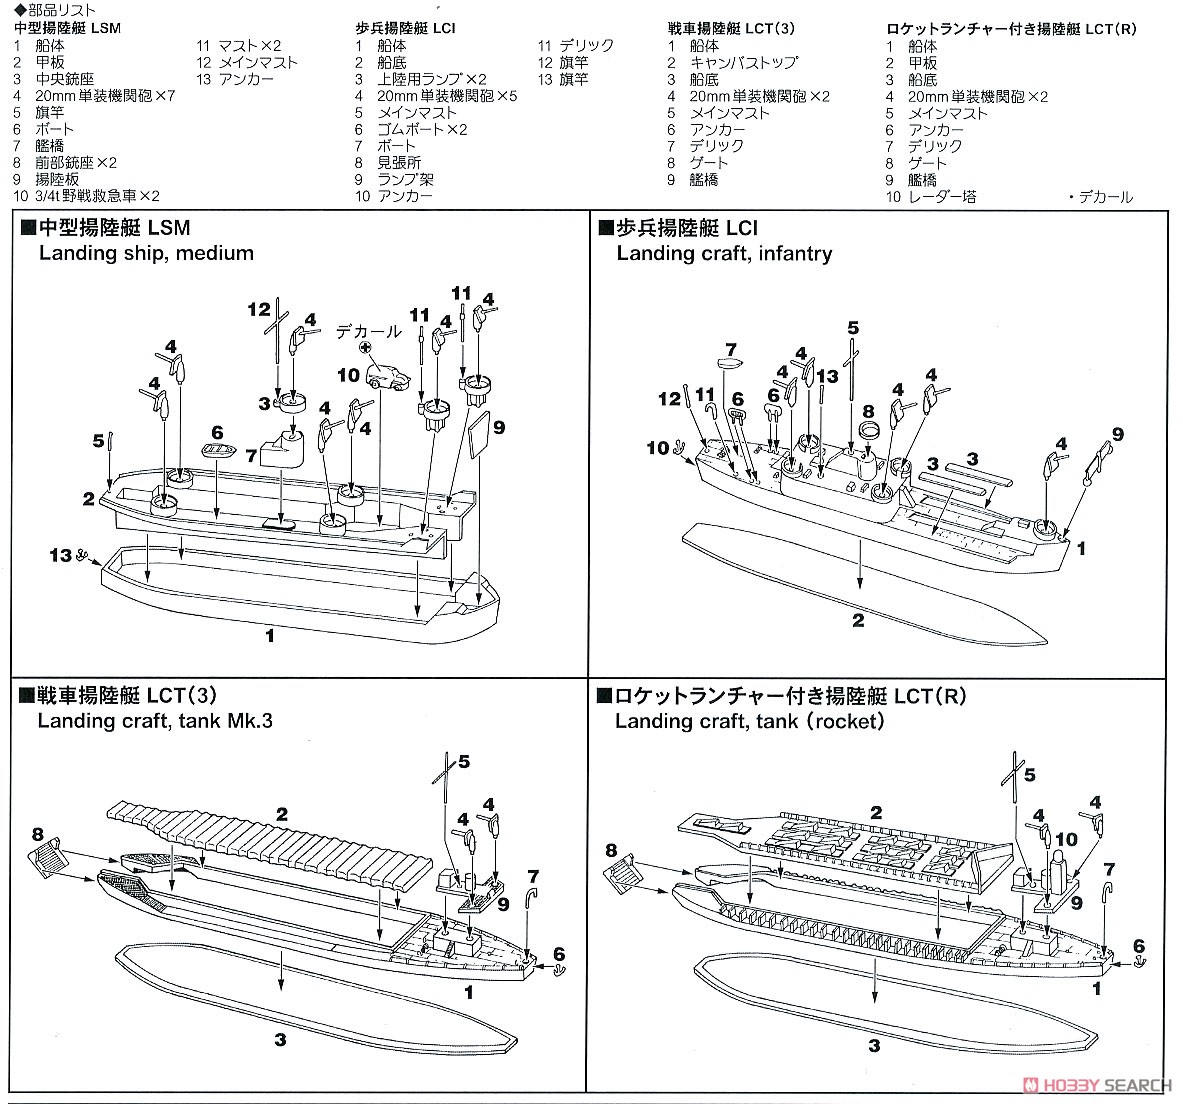 WWII Invasion of Iwo Jima (Plastic model) Assembly guide2